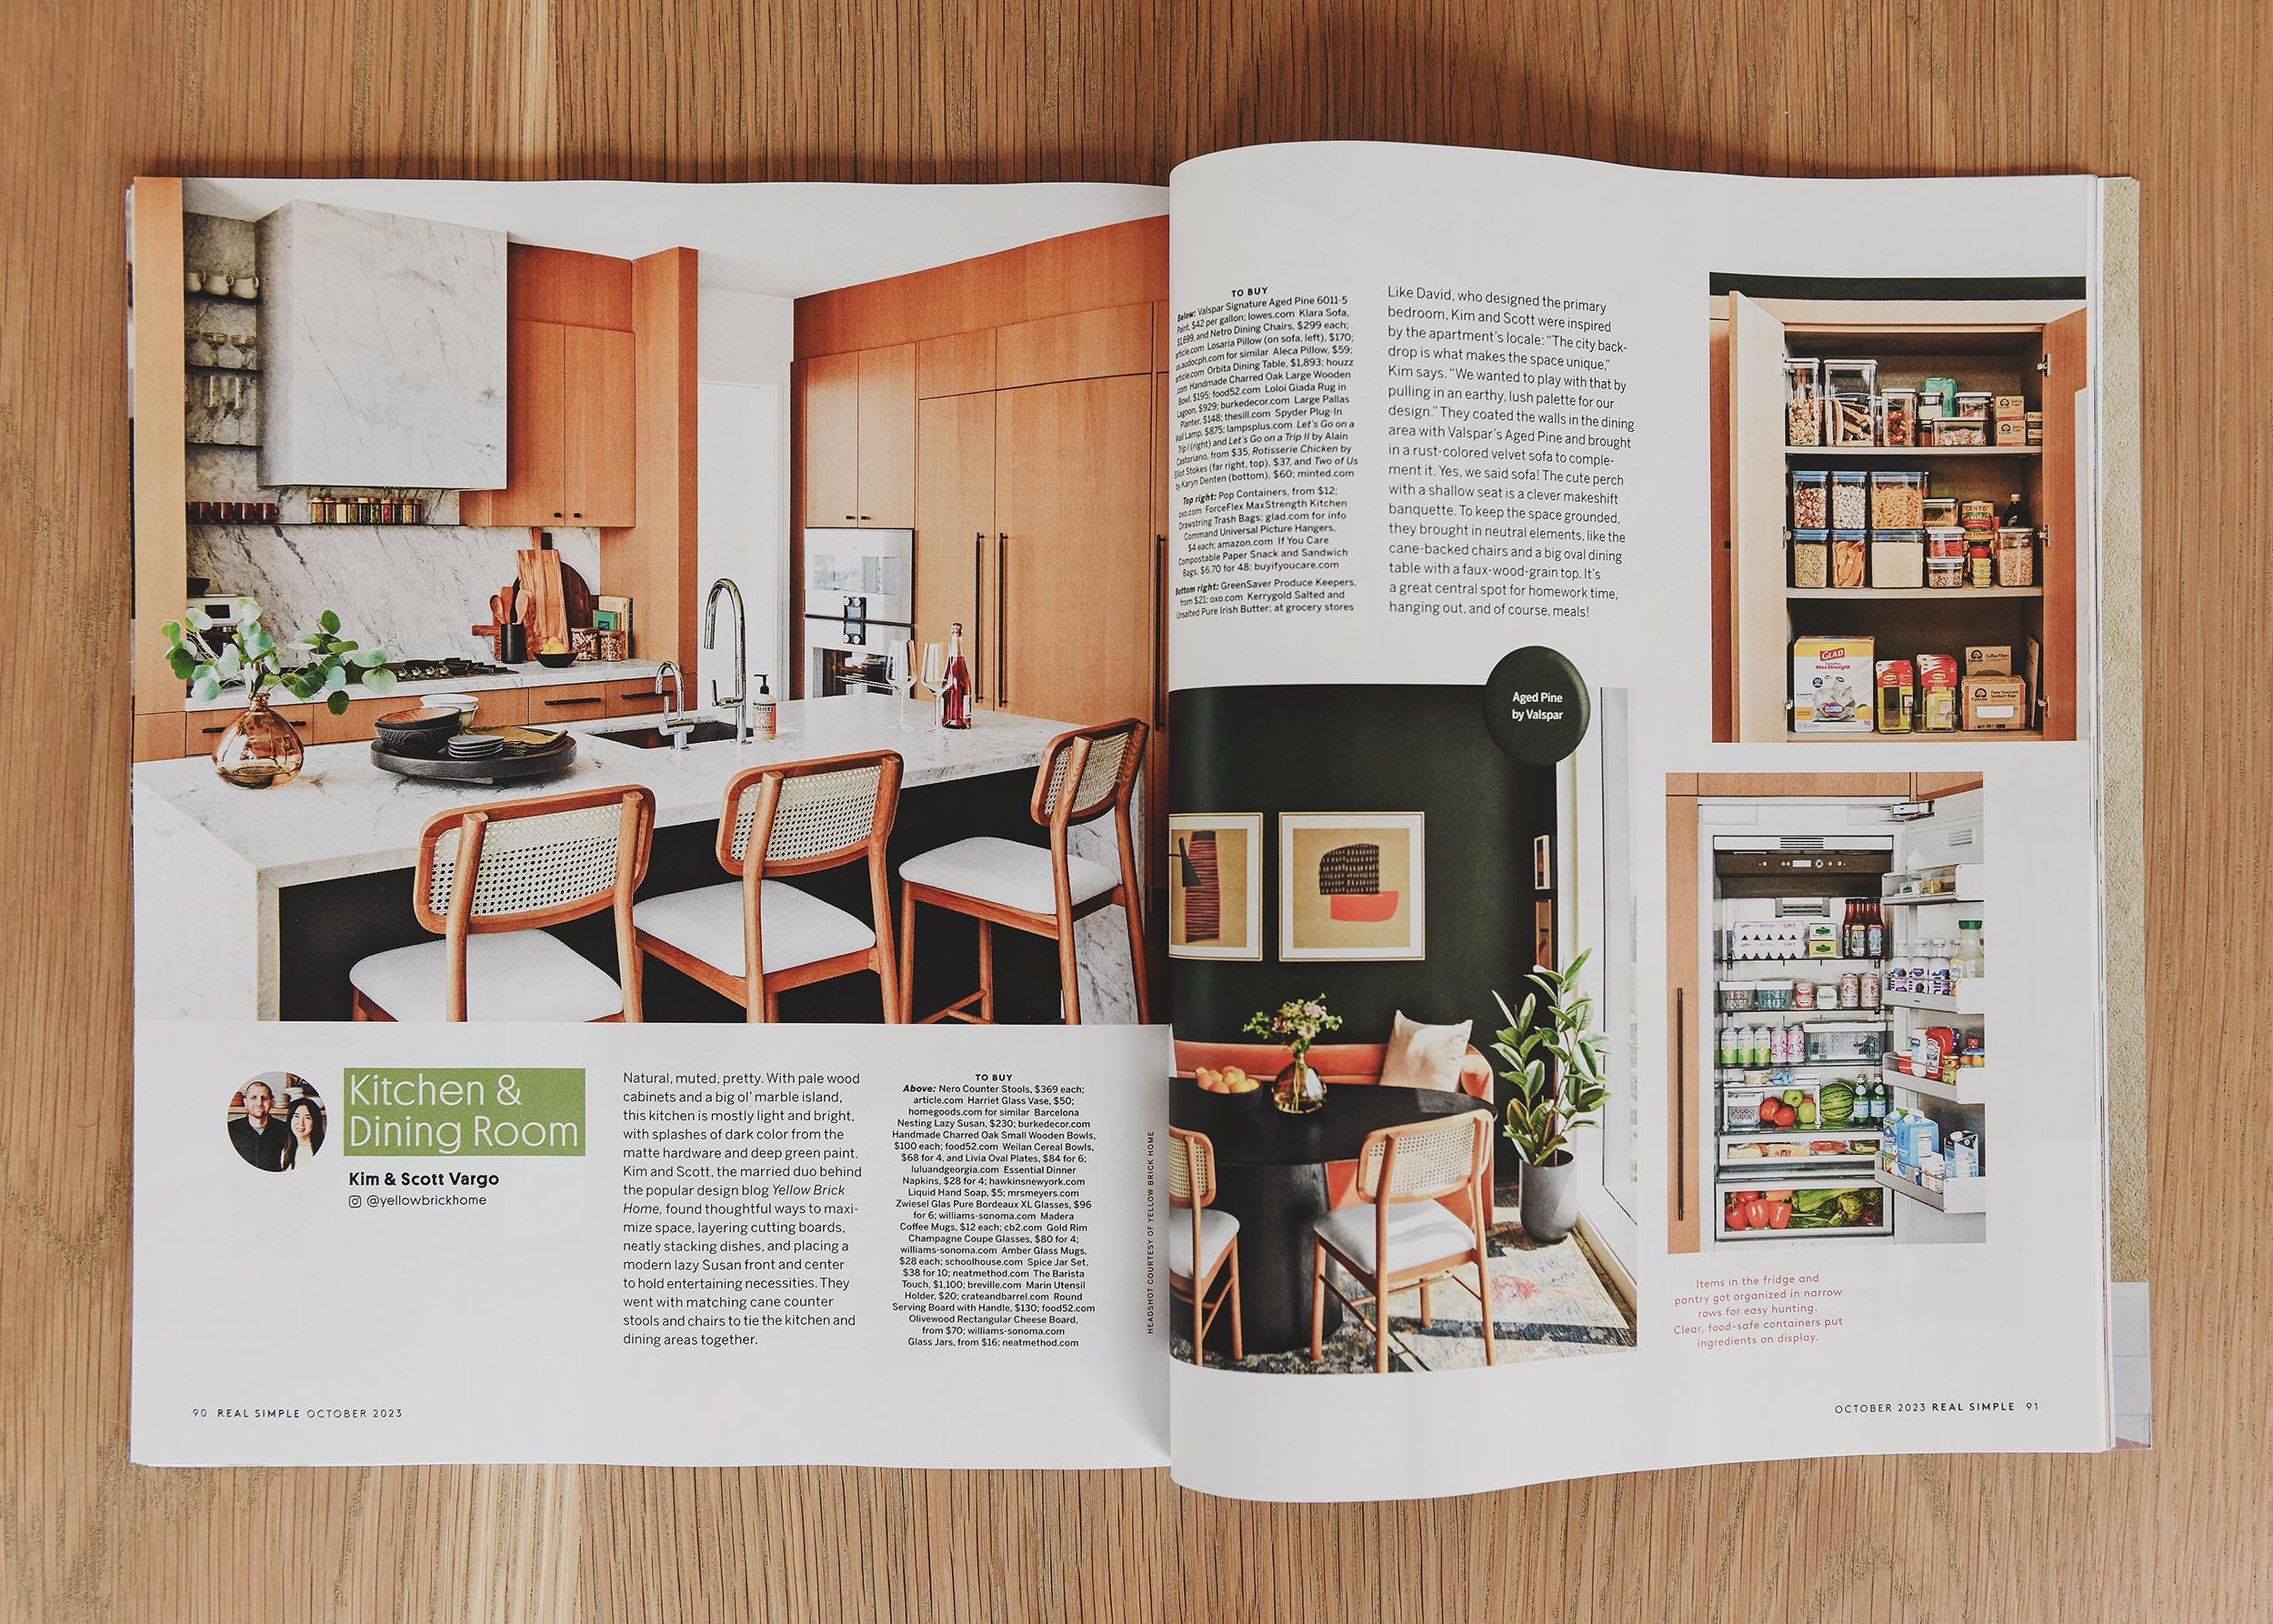 Our magazine spread for the Real Simple Home 2023 | via Yellow Brick Home